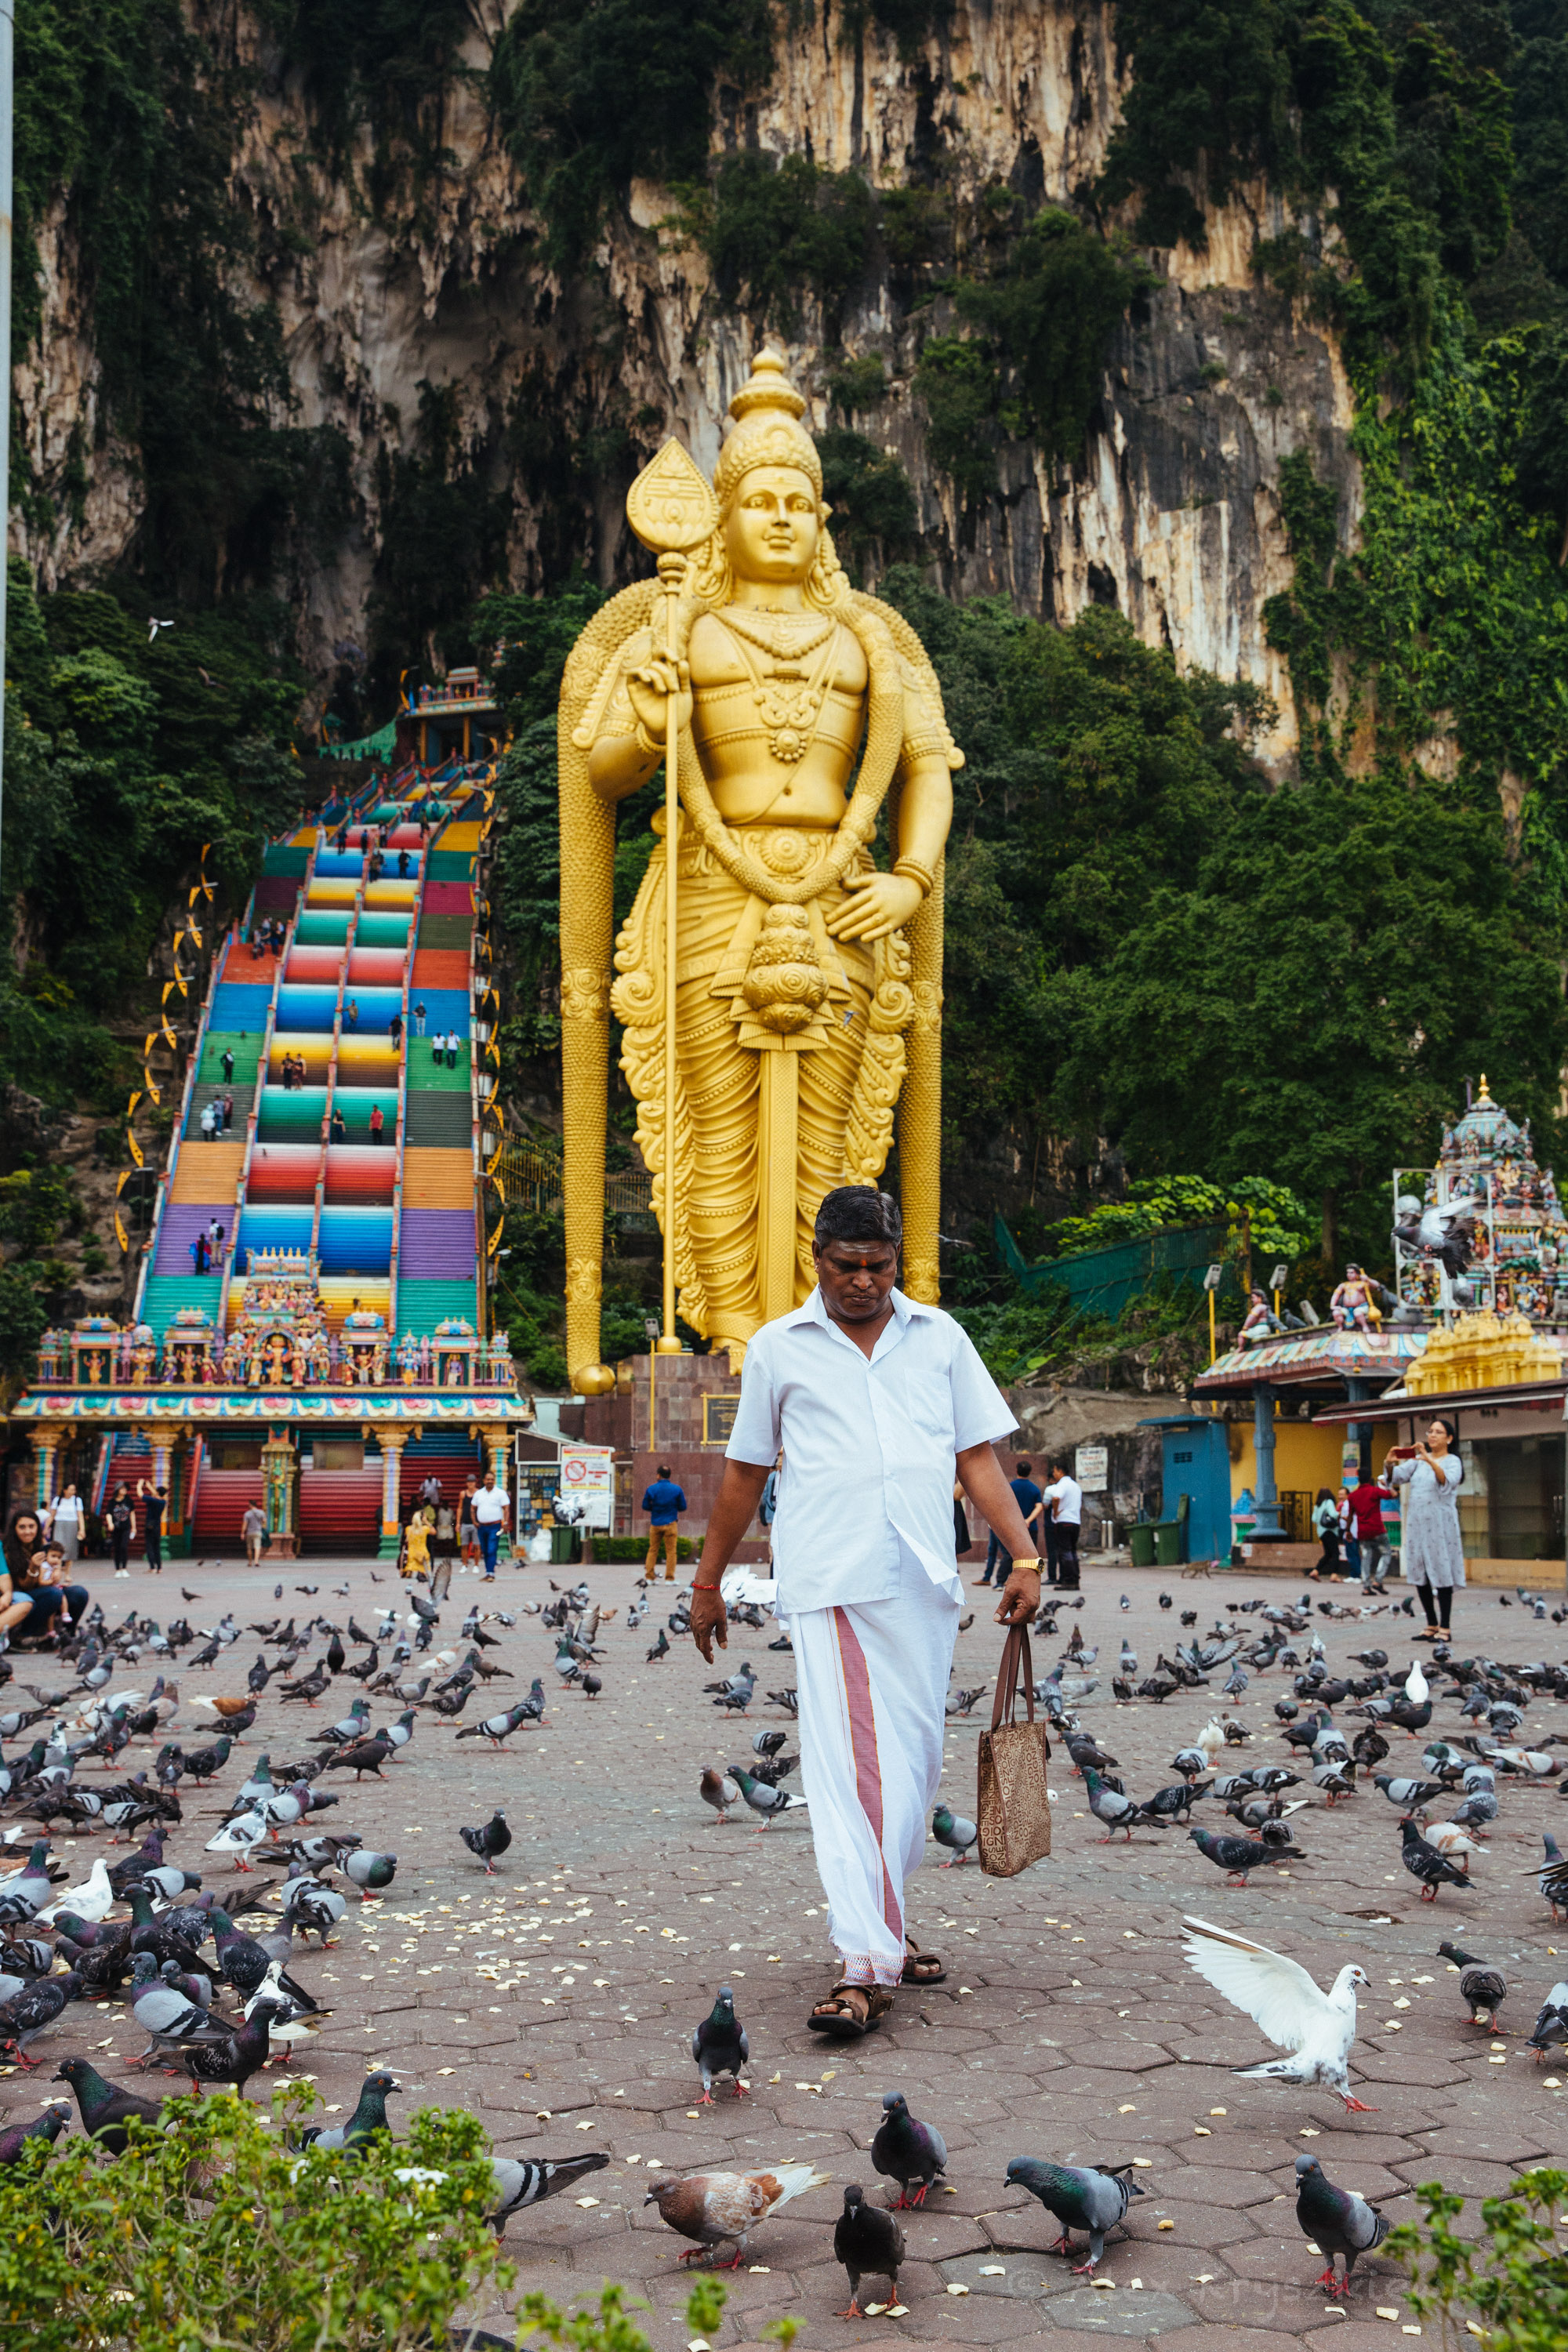 A visitor leaves the shrines and the bustling frenzy of life at Batu Caves